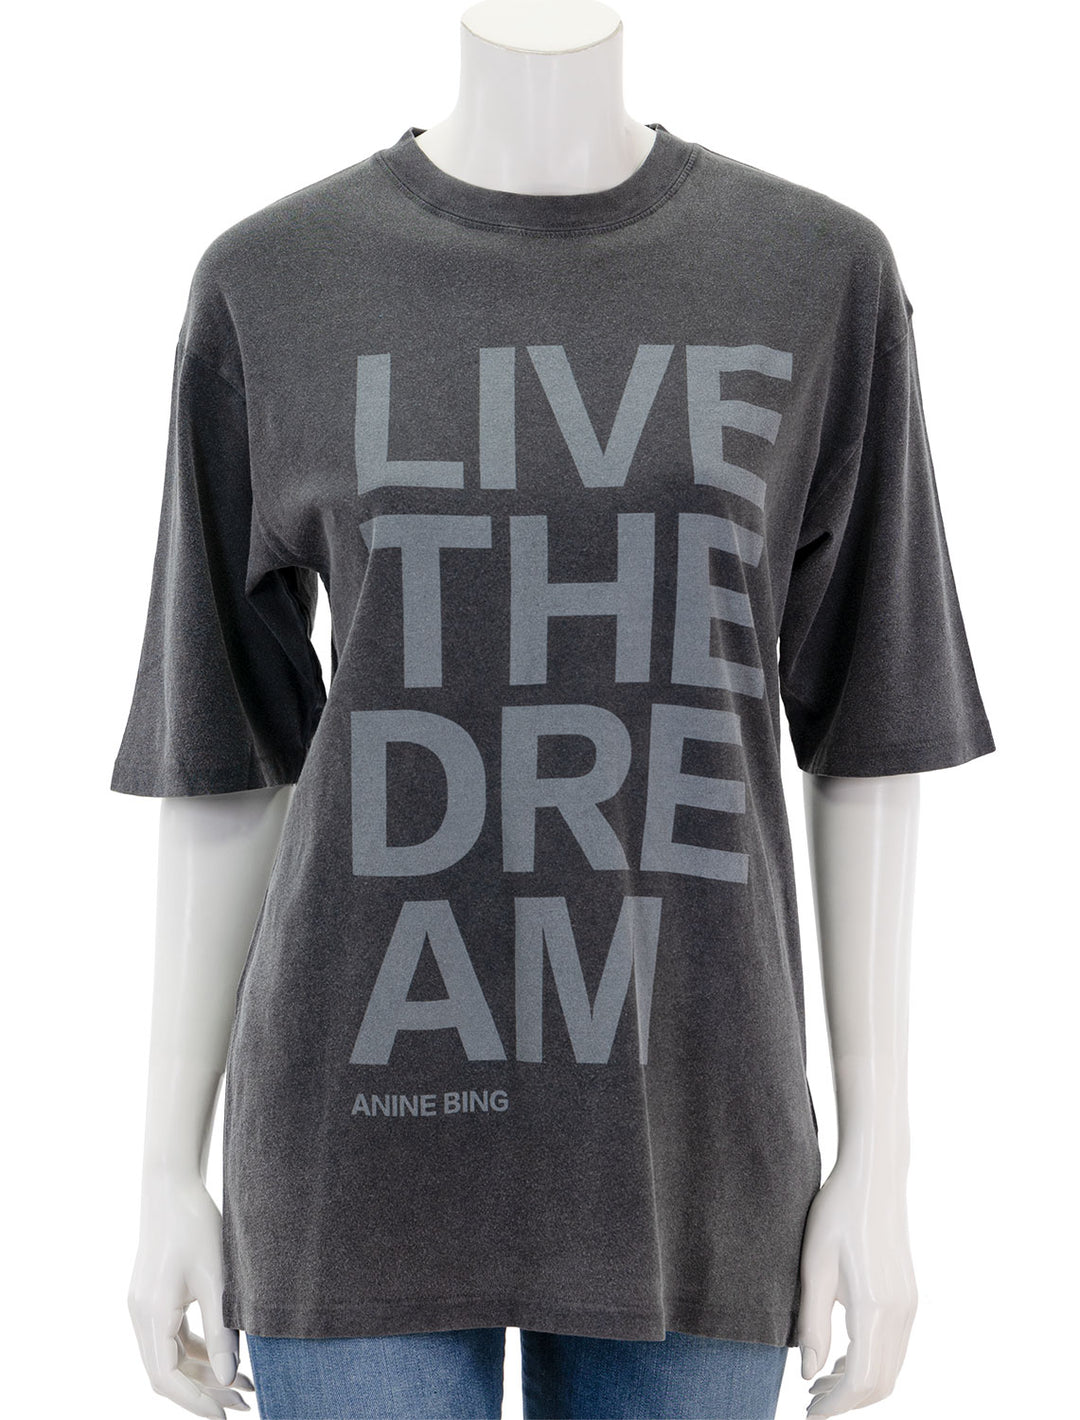 Front view of Anine Bing's cason tee live the dream.